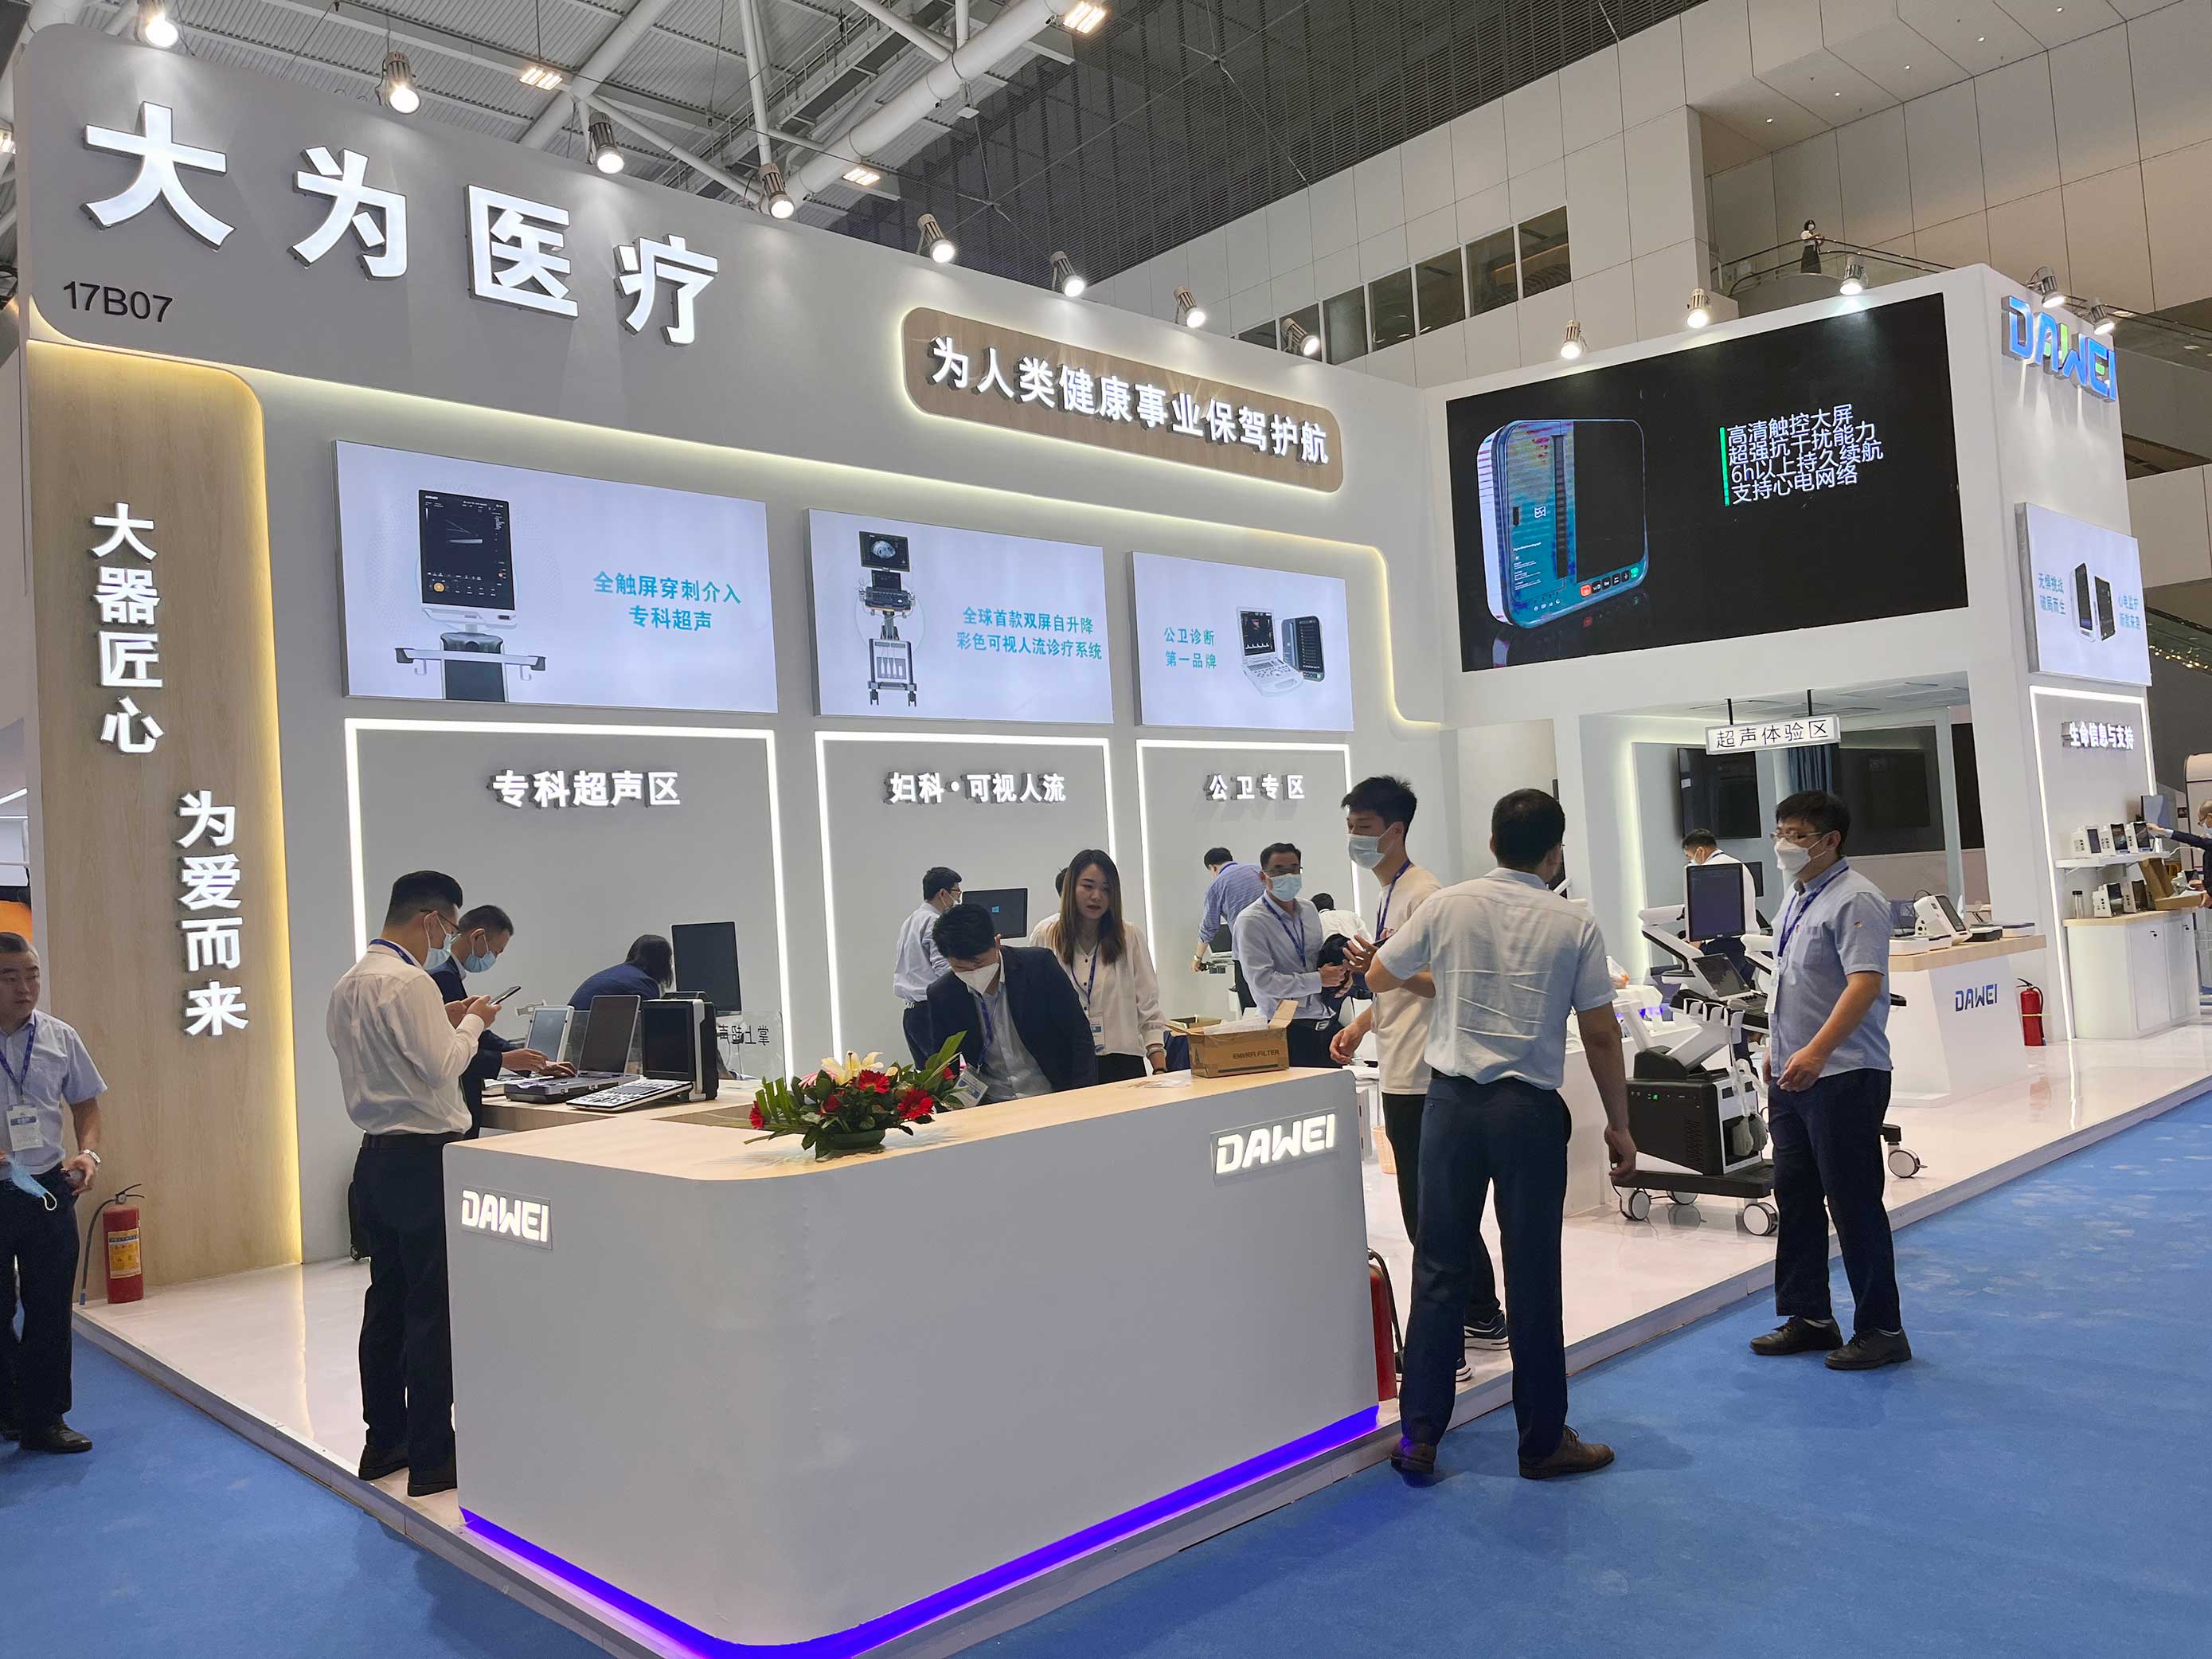 The Dawei booth is completely established! CMEF in shenzhen